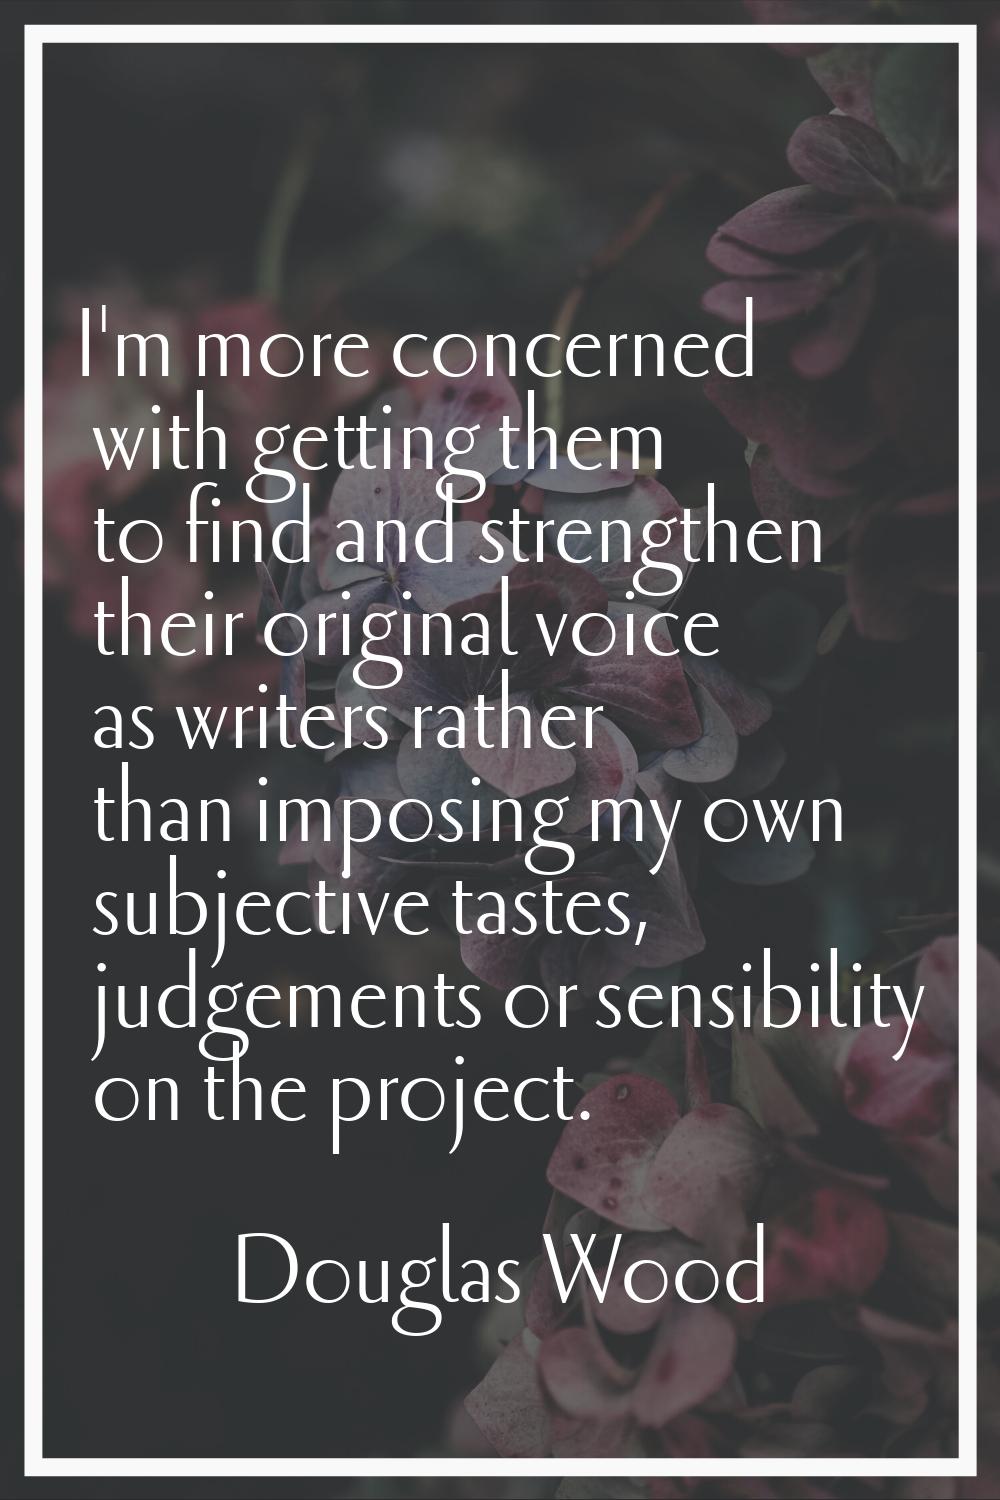 I'm more concerned with getting them to find and strengthen their original voice as writers rather 